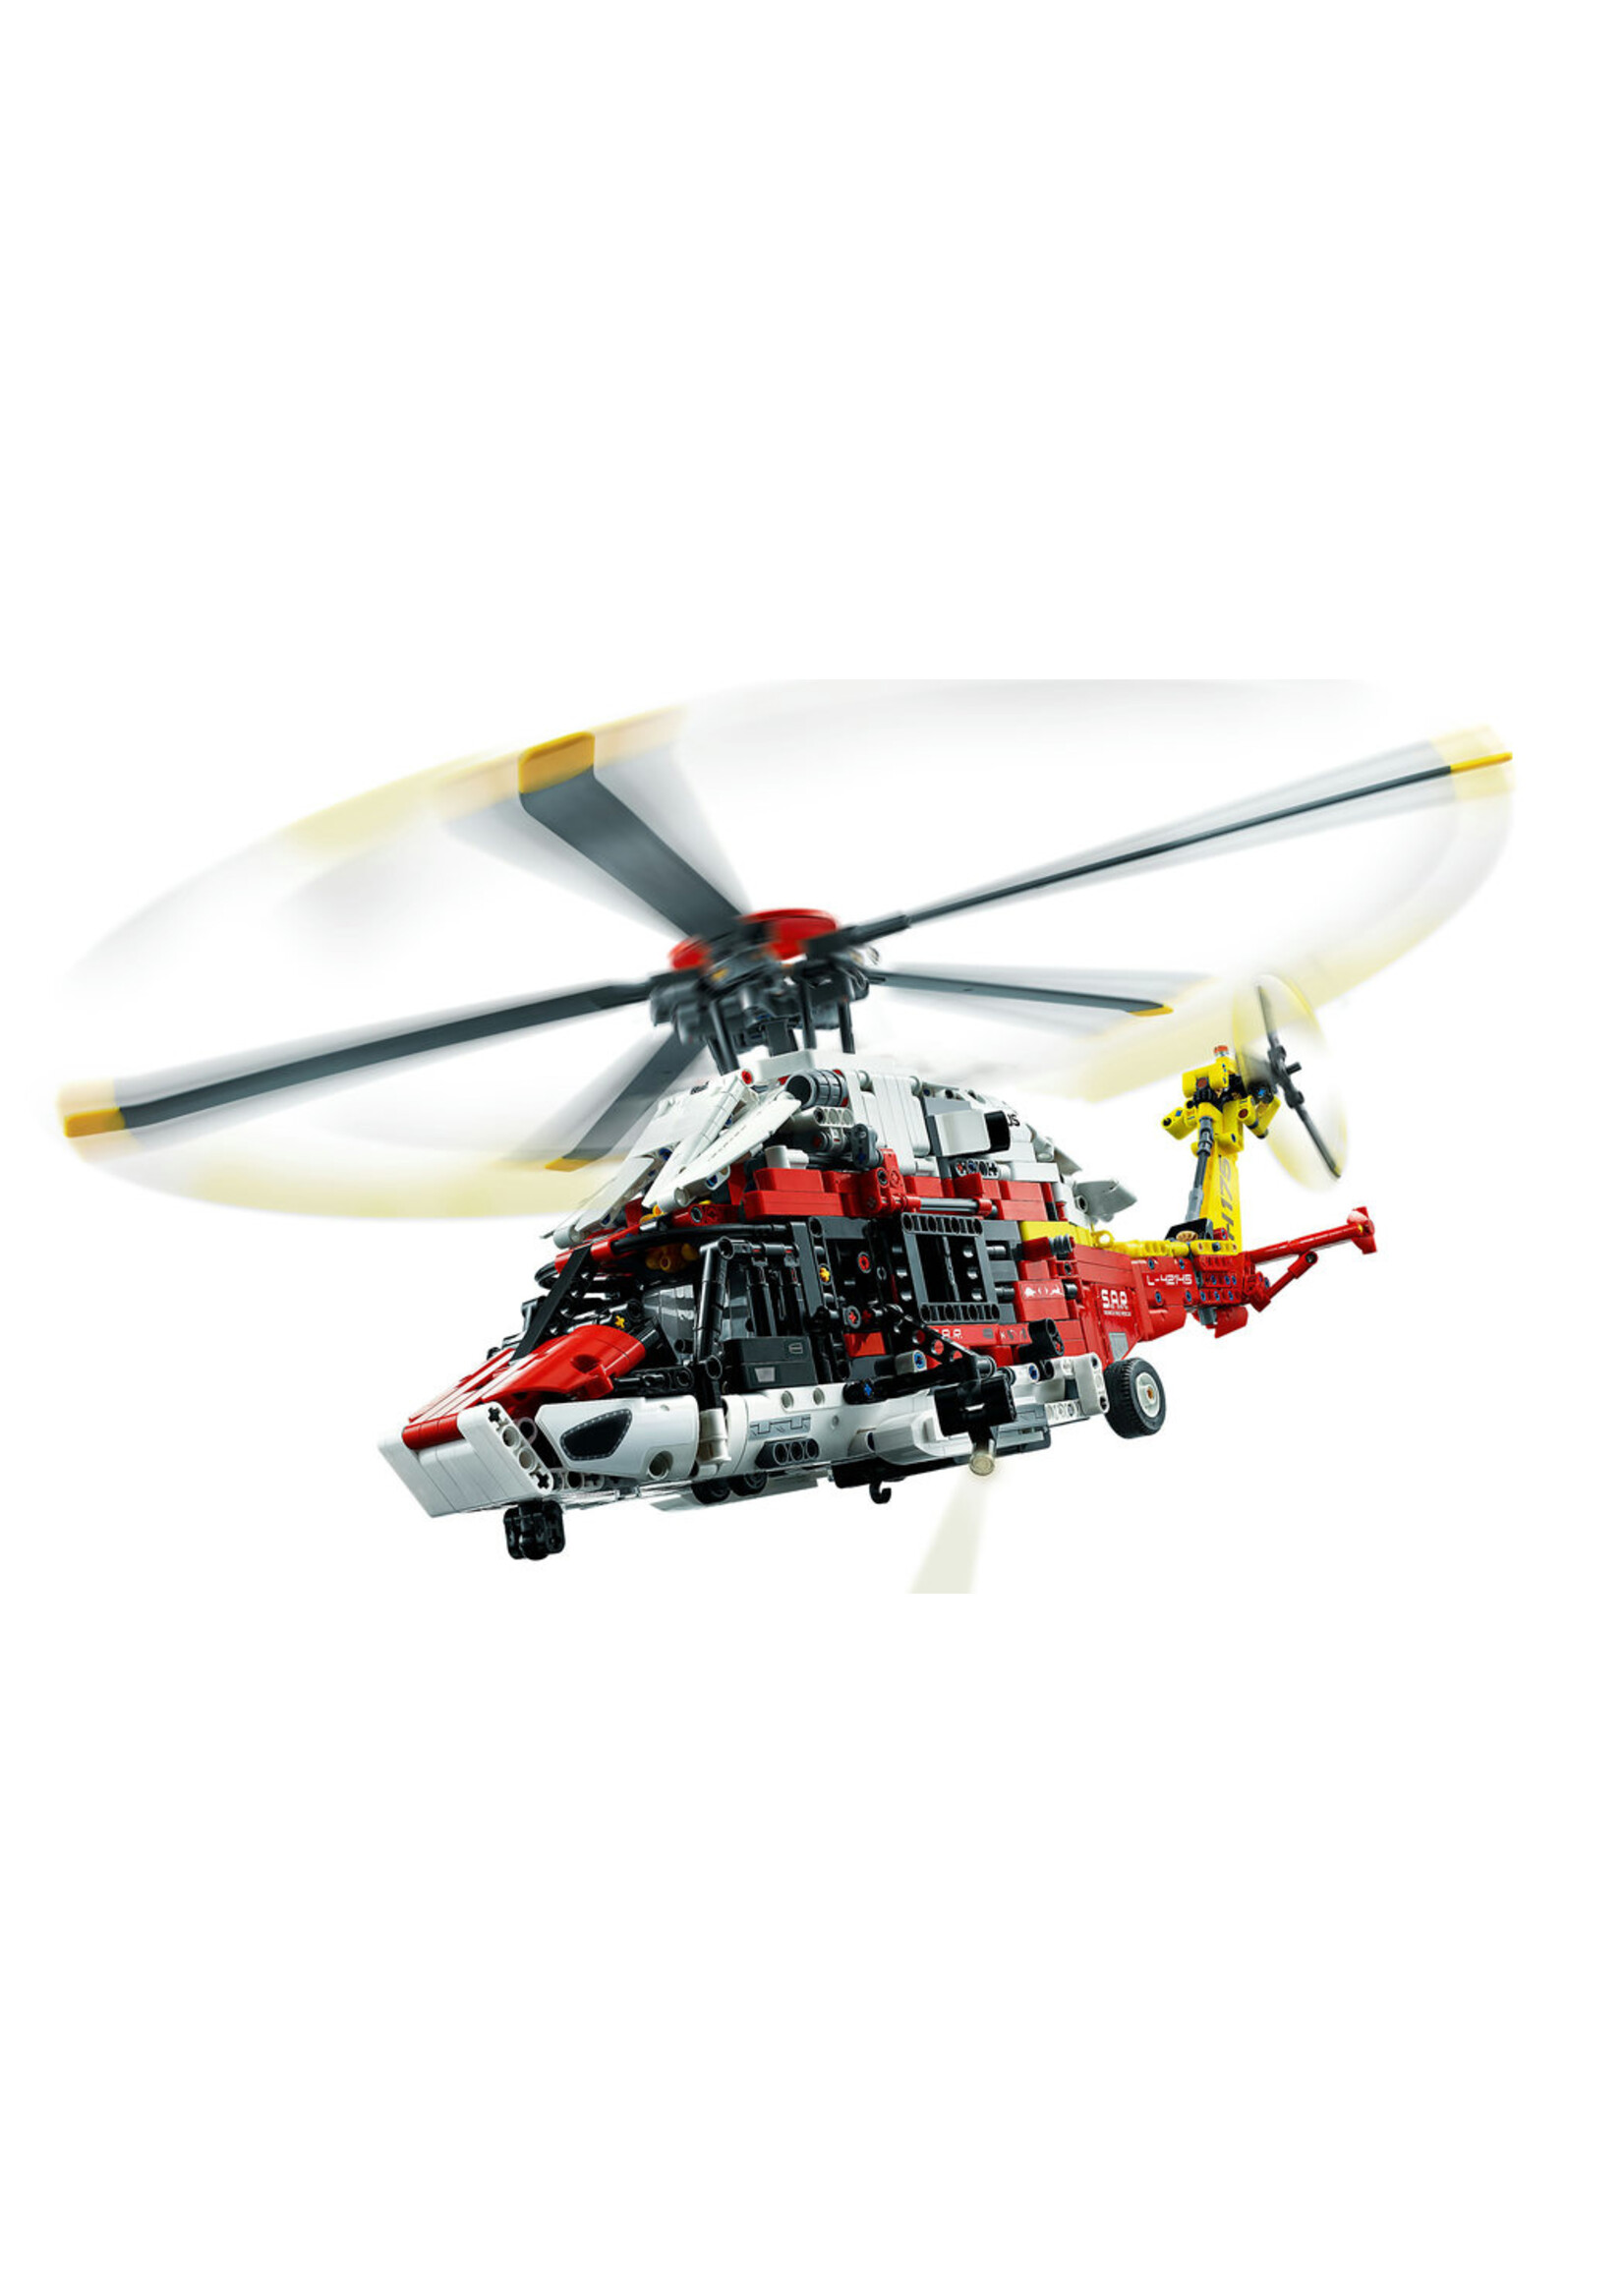 LEGO 42145 - Airbus H175 Rescue Helicopter